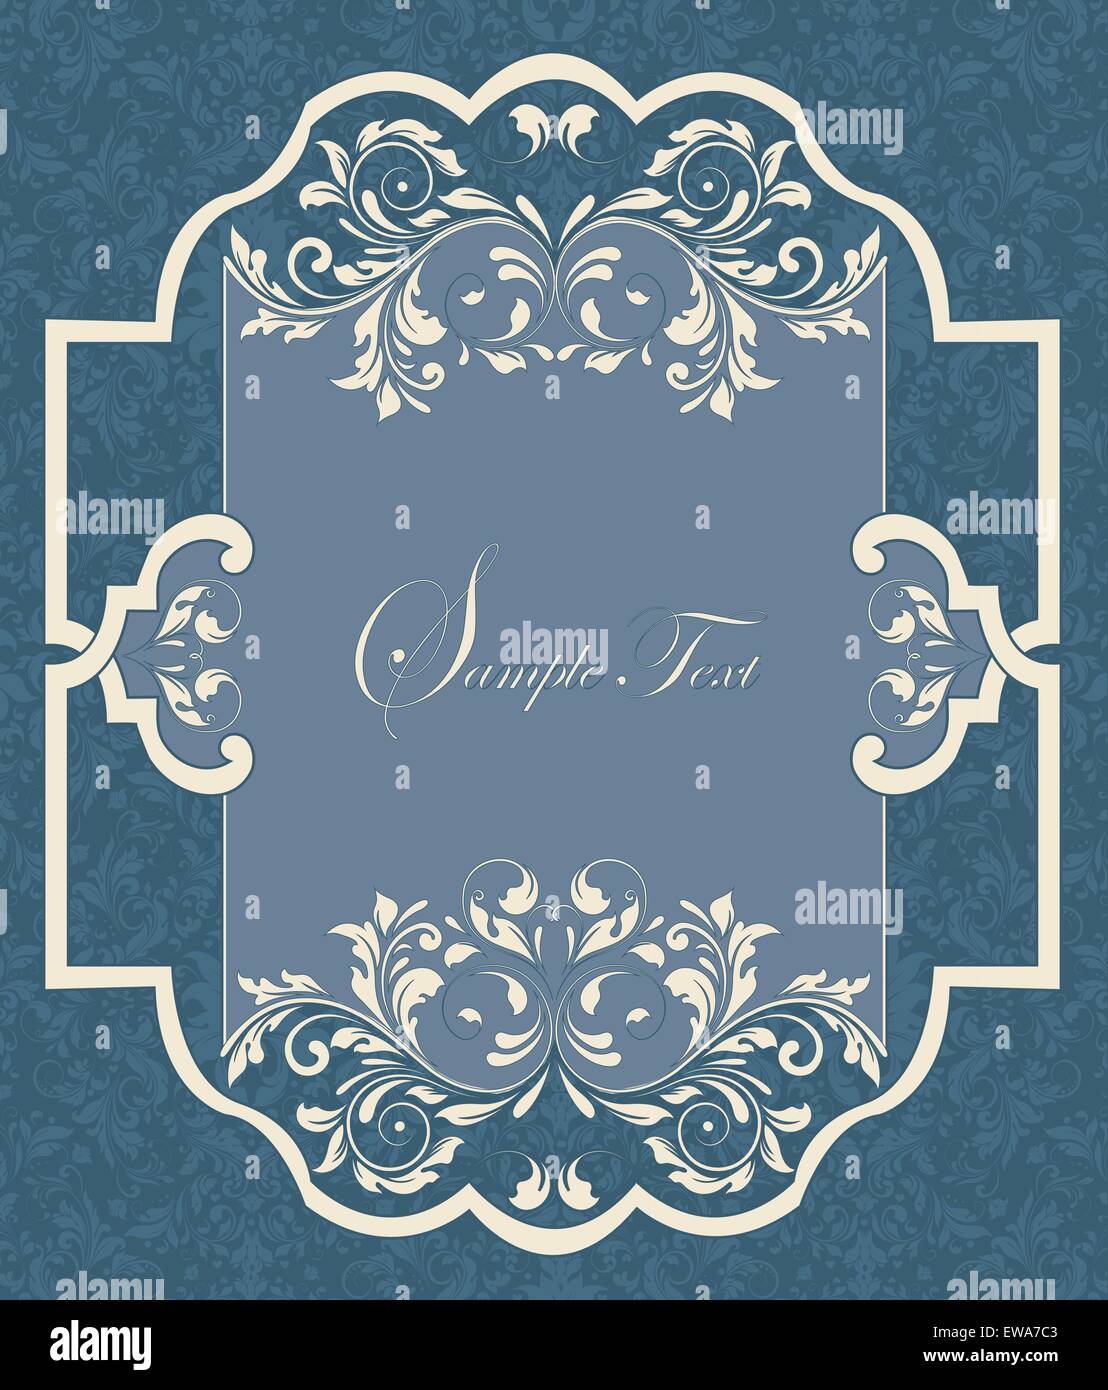 Vintage invitation card with ornate elegant retro abstract floral design, cream white flowers and leaves on azure blue Stock Vector